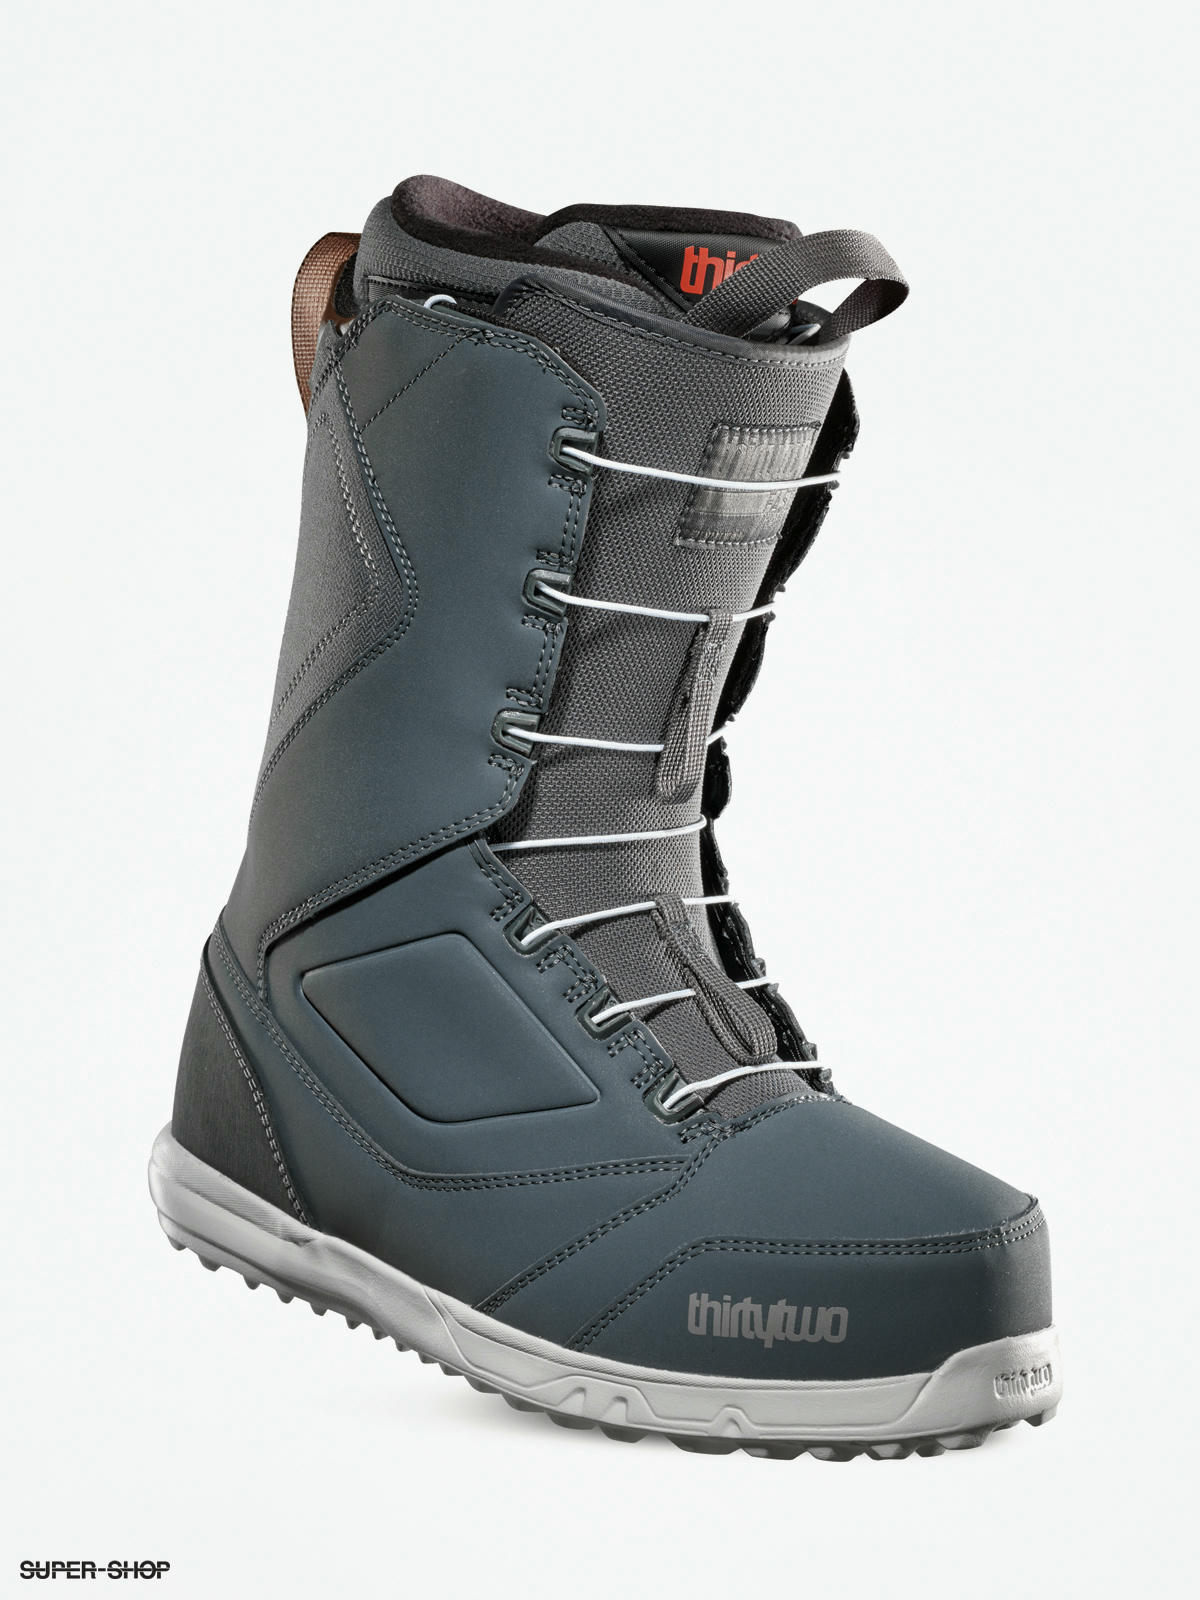 ThirtyTwo Zephyr Ft Snowboard boots (grey)